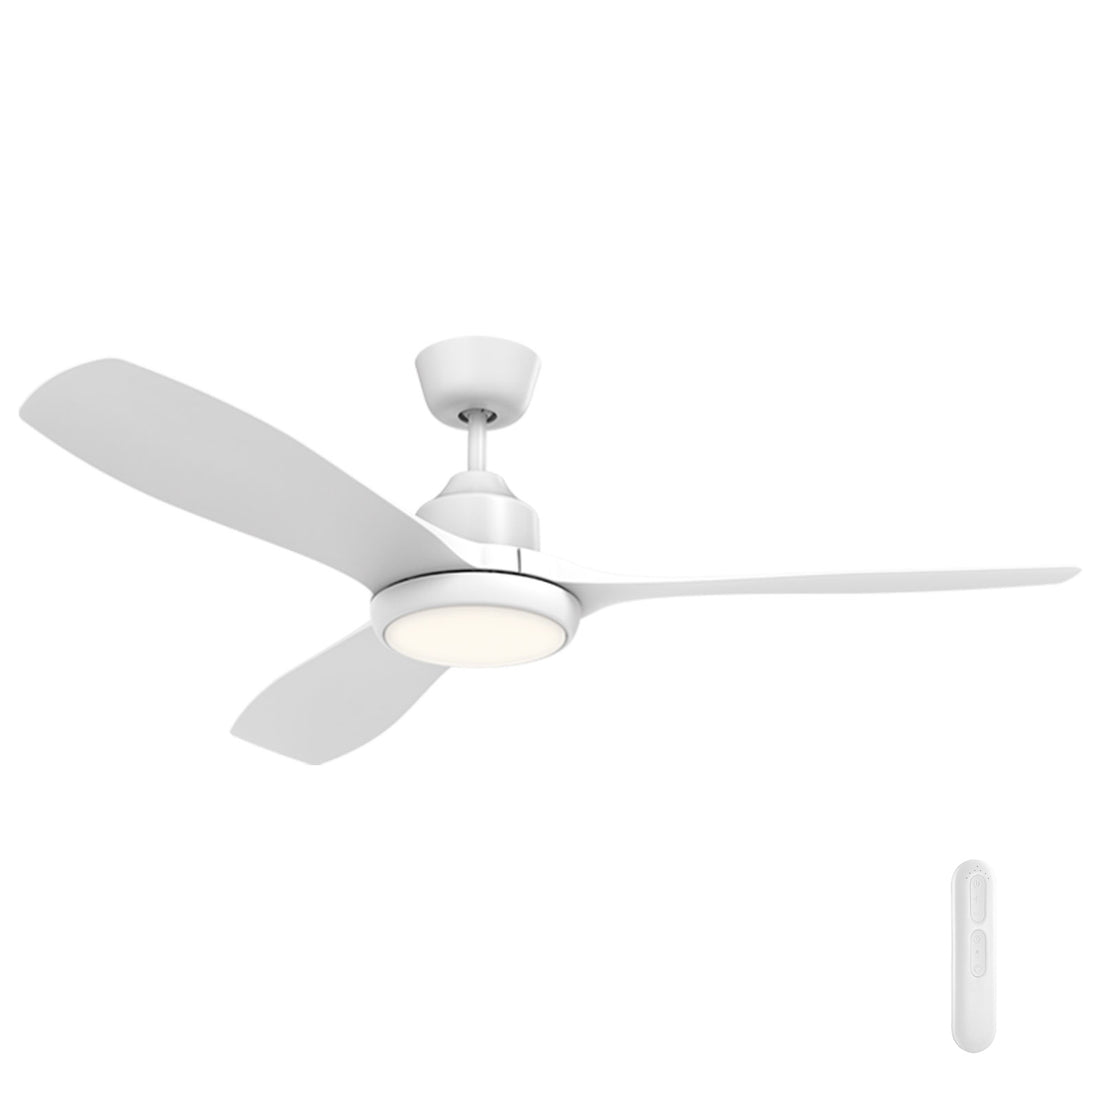 Raptor 131cm DC Ceiling Fan with Remote and LED Light